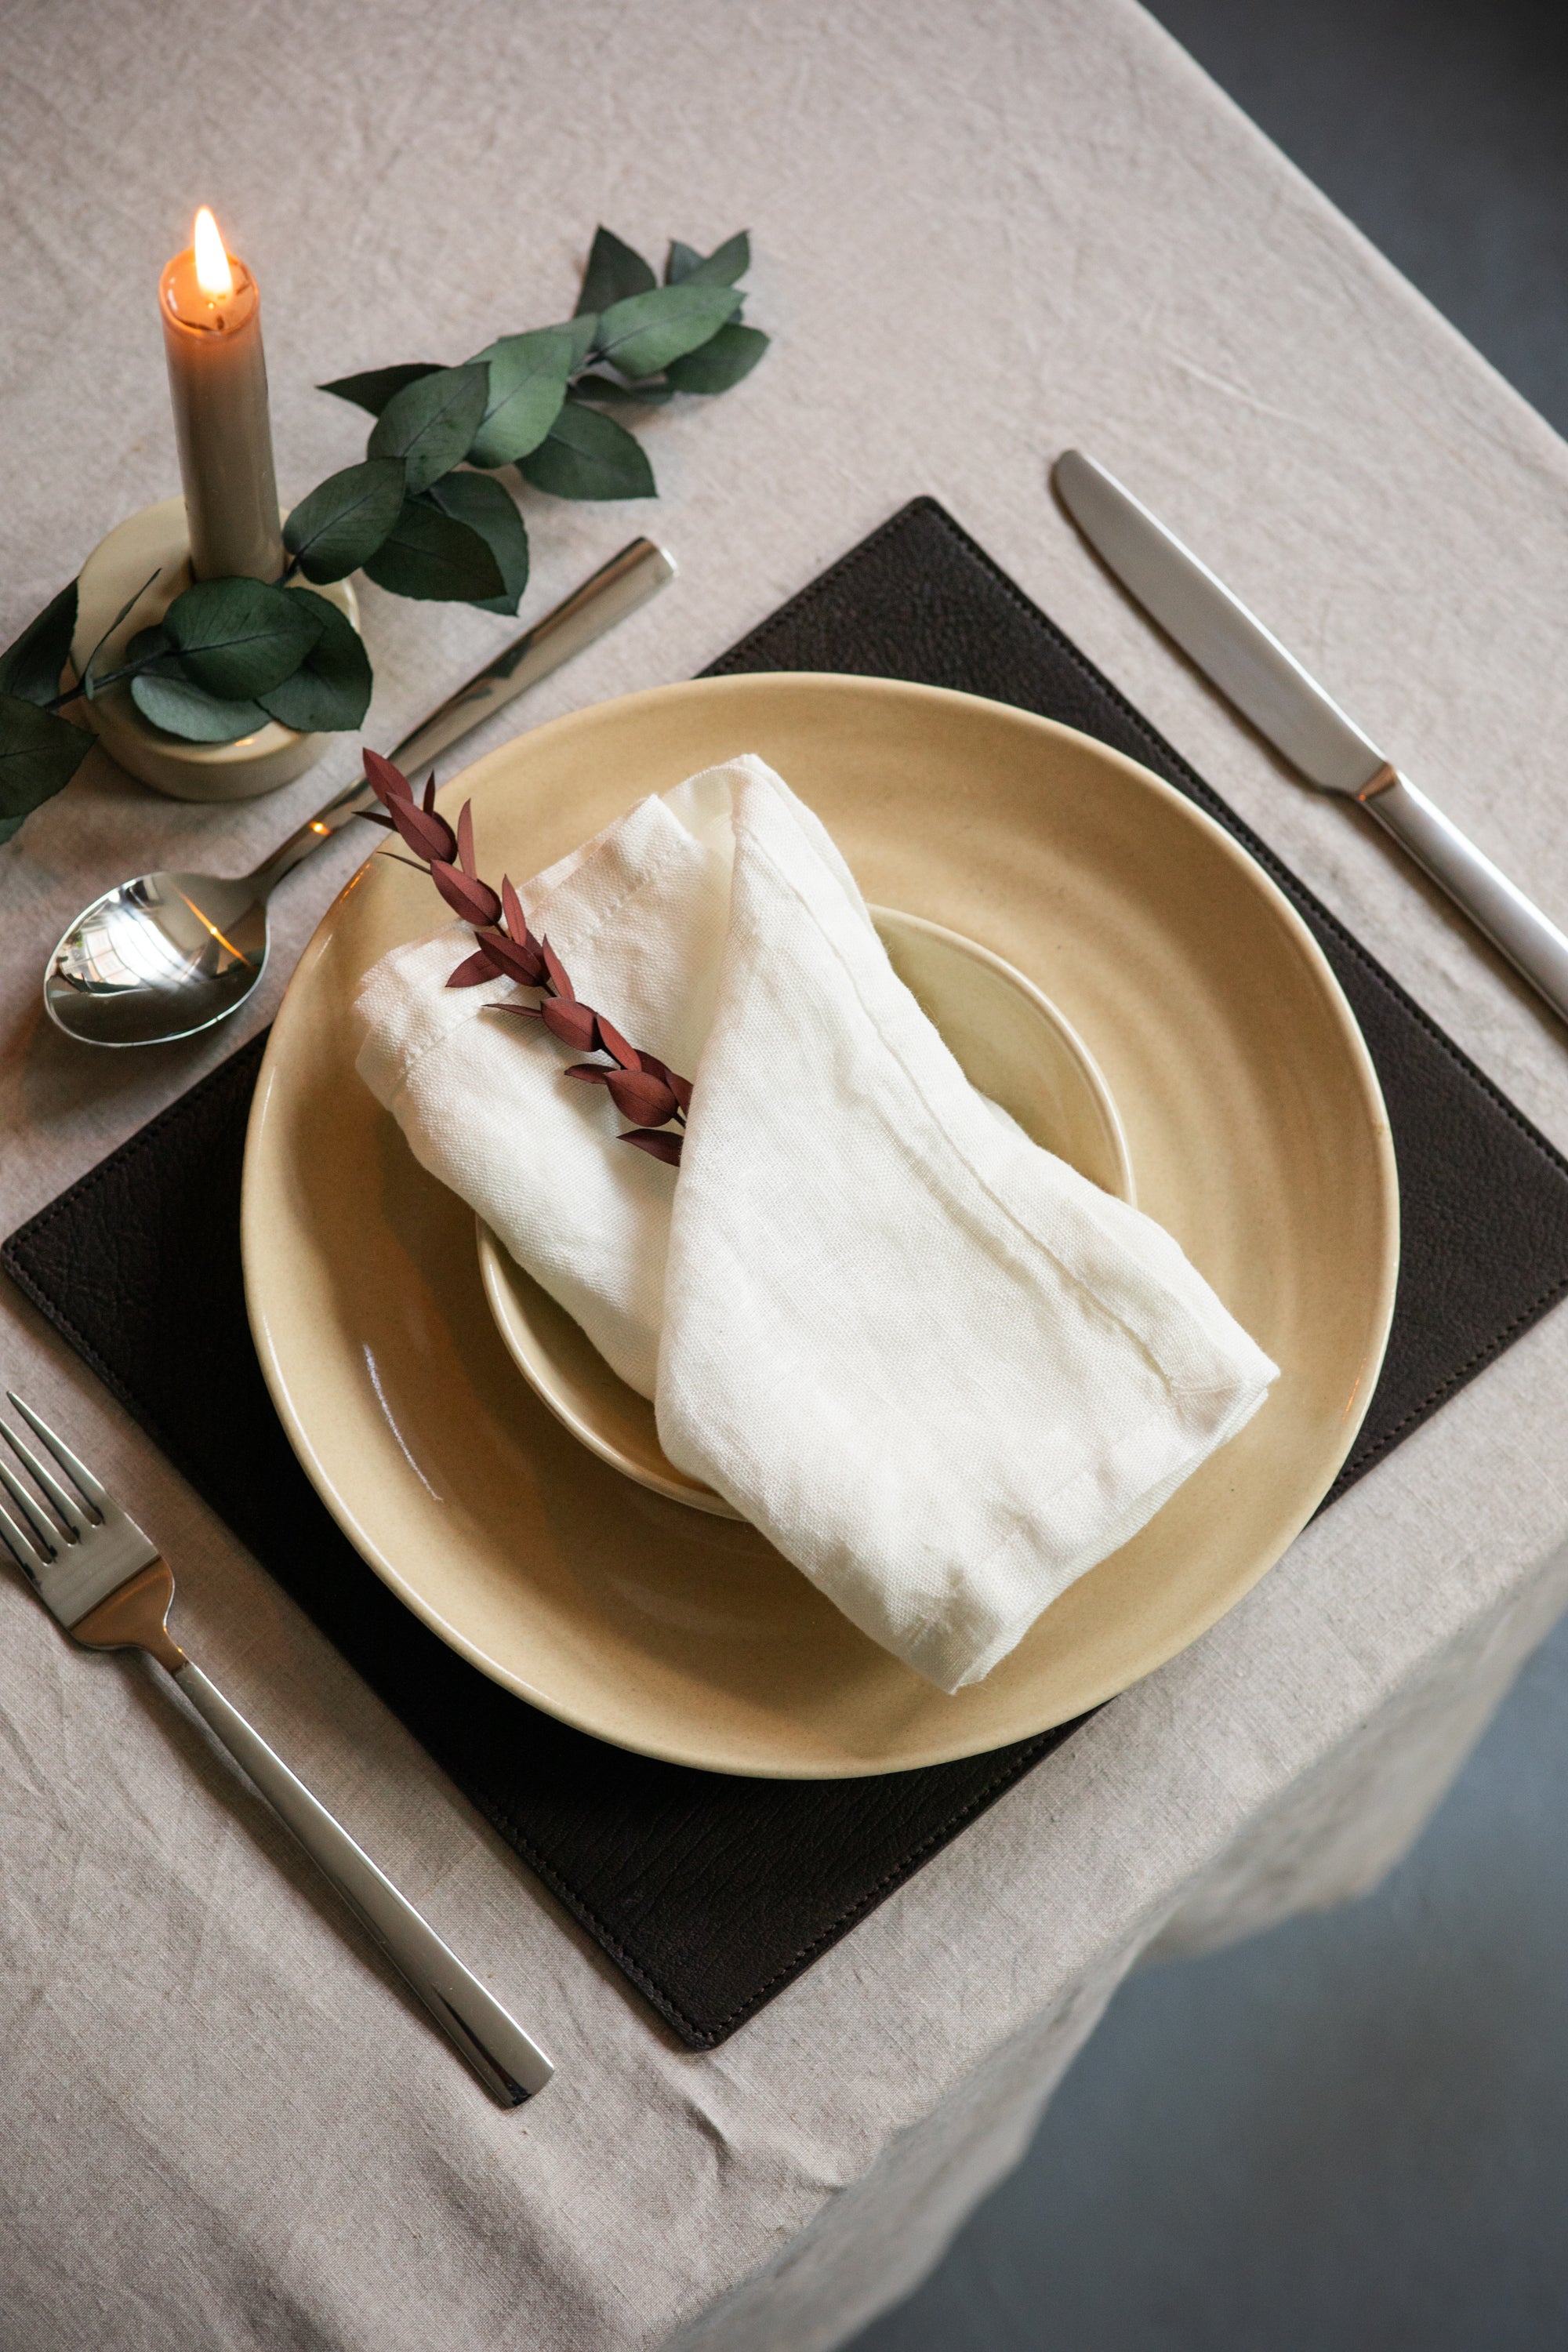 A guide to sustainable tableware